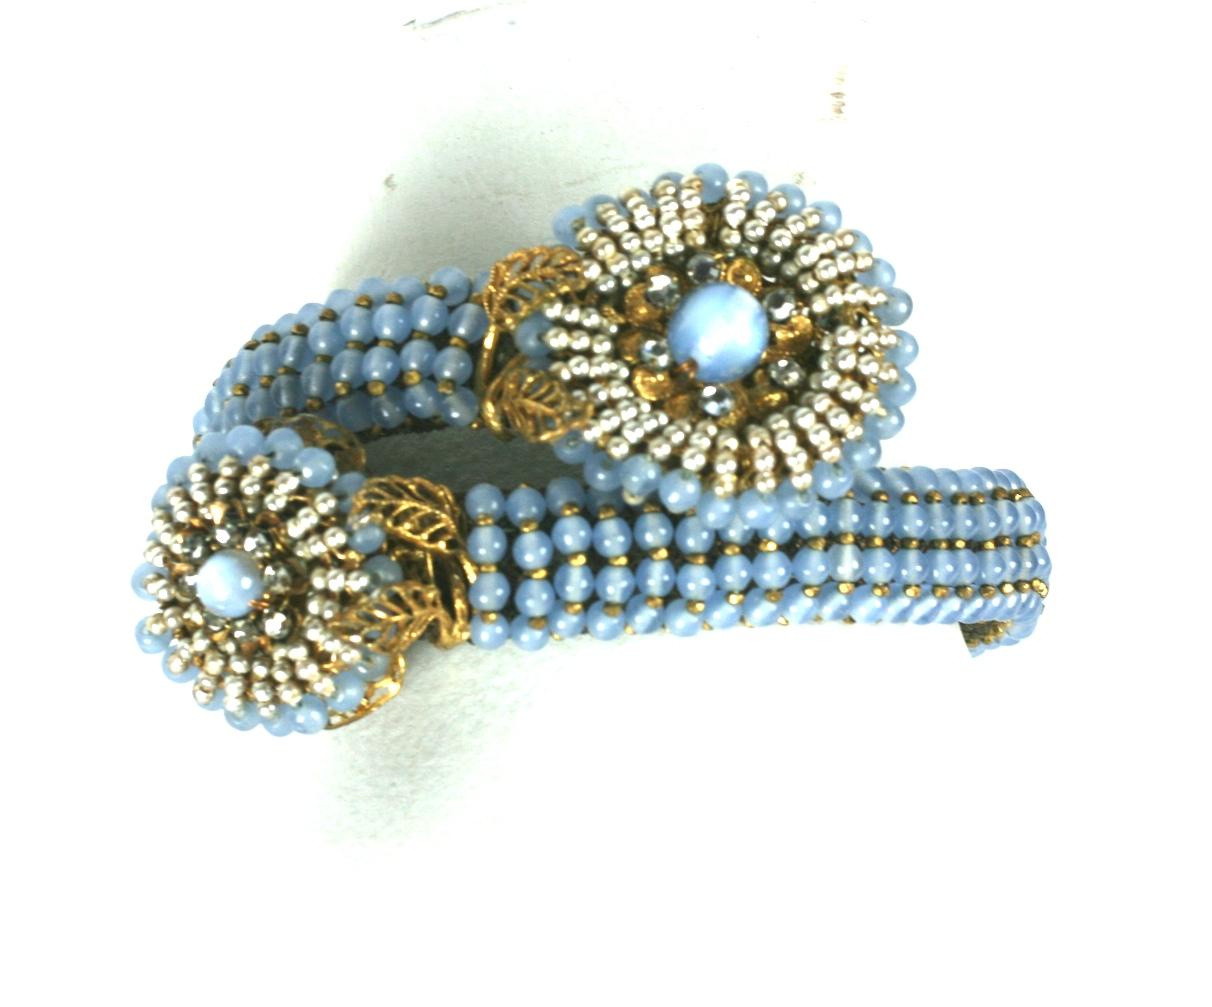 Early Miriam Haskell elaborate wrap bracelet. The bracelet composed of faux Blue Chalcedony round beads, small gilt faceted cut steel spacers and signature Russian gilt filigrees.  All hand sewn on to a metallic cord base which is flexible and can